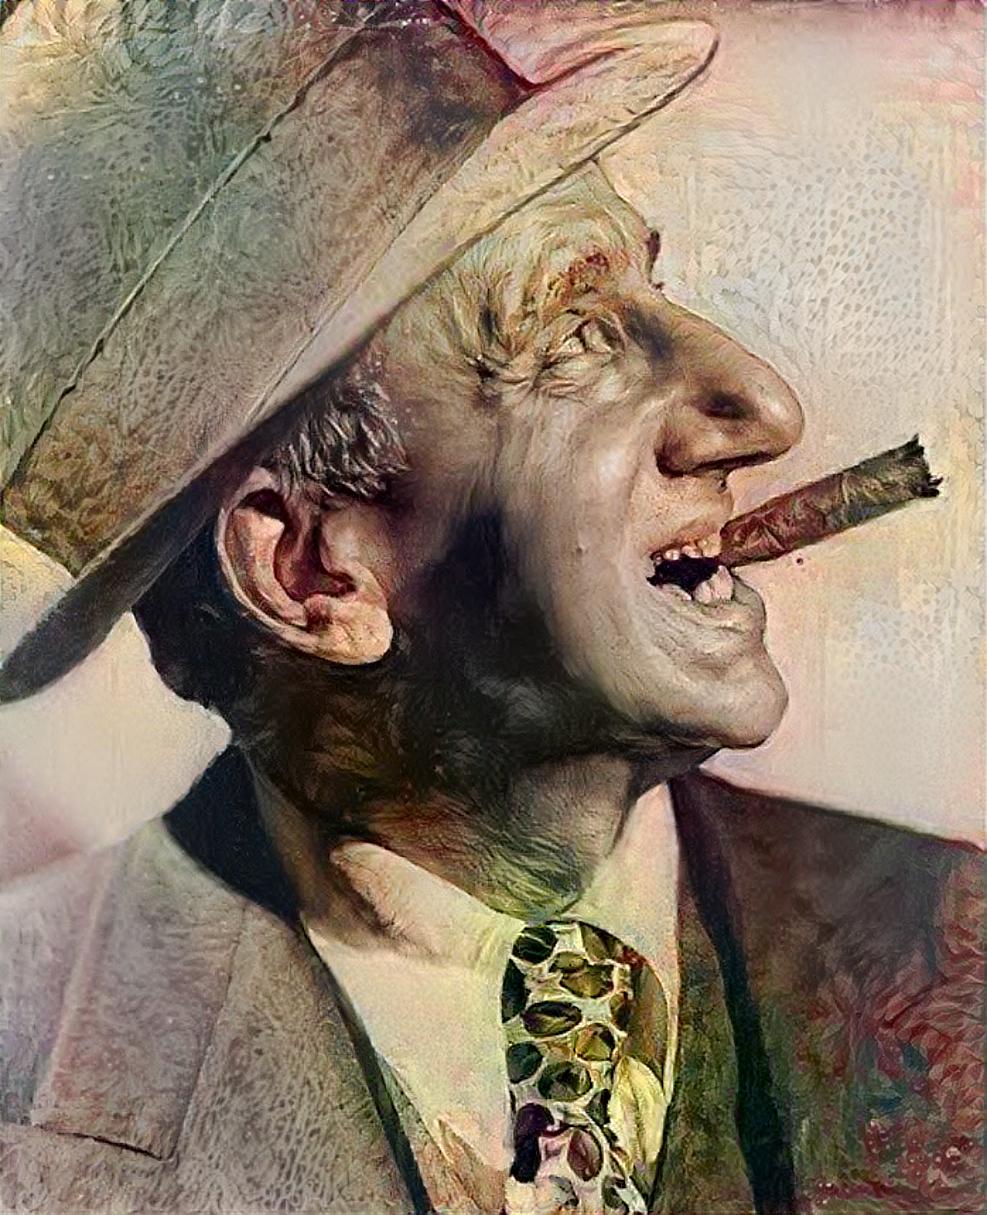 Deep Dreaming the late great Jimmy Durante